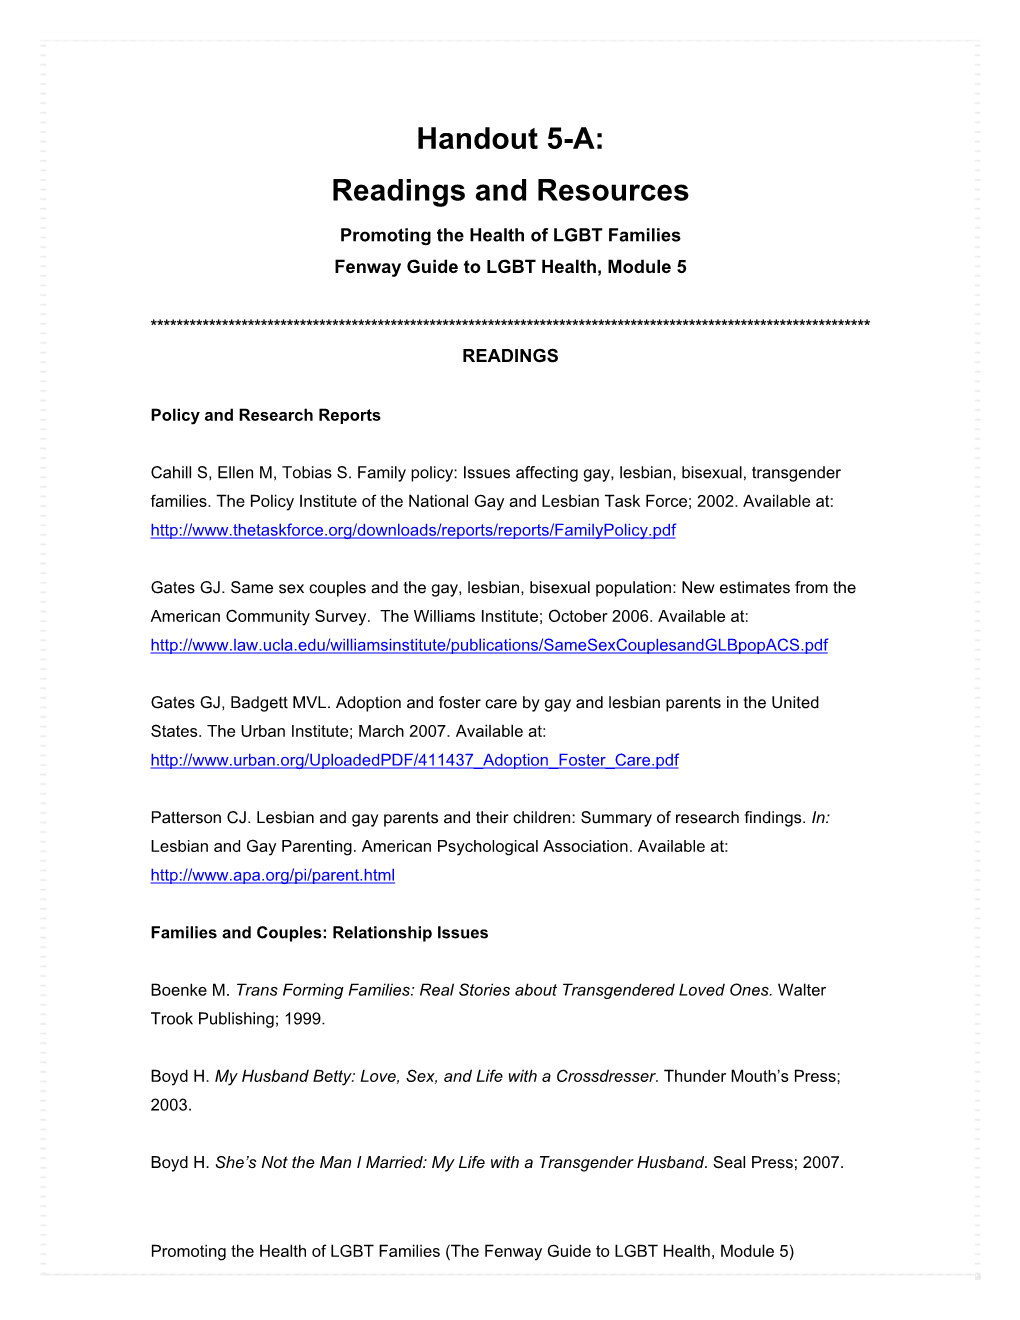 Handout 5-A: Readings and Resources